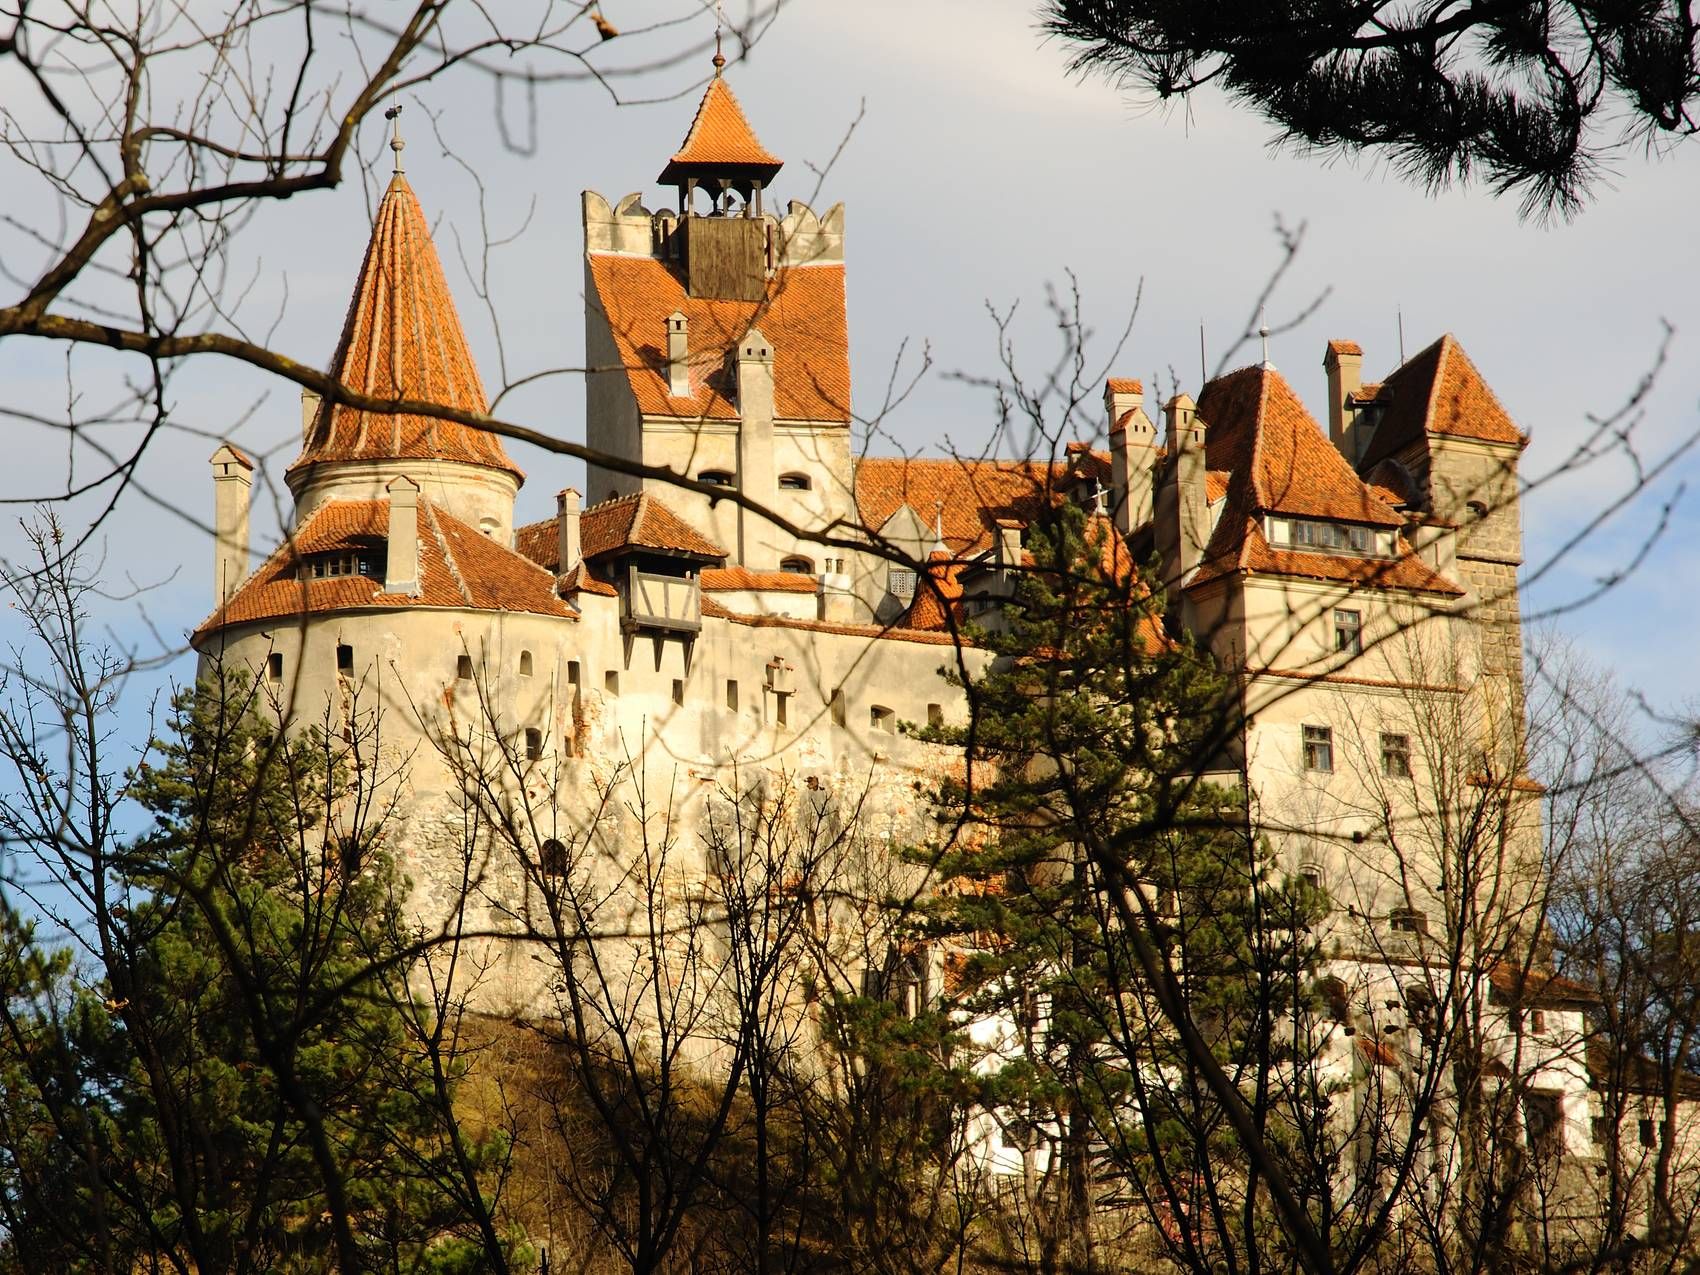 A castle in Romania known for being a tourist hotspot for Dracula fans started giving out COVID-19 vaccines.